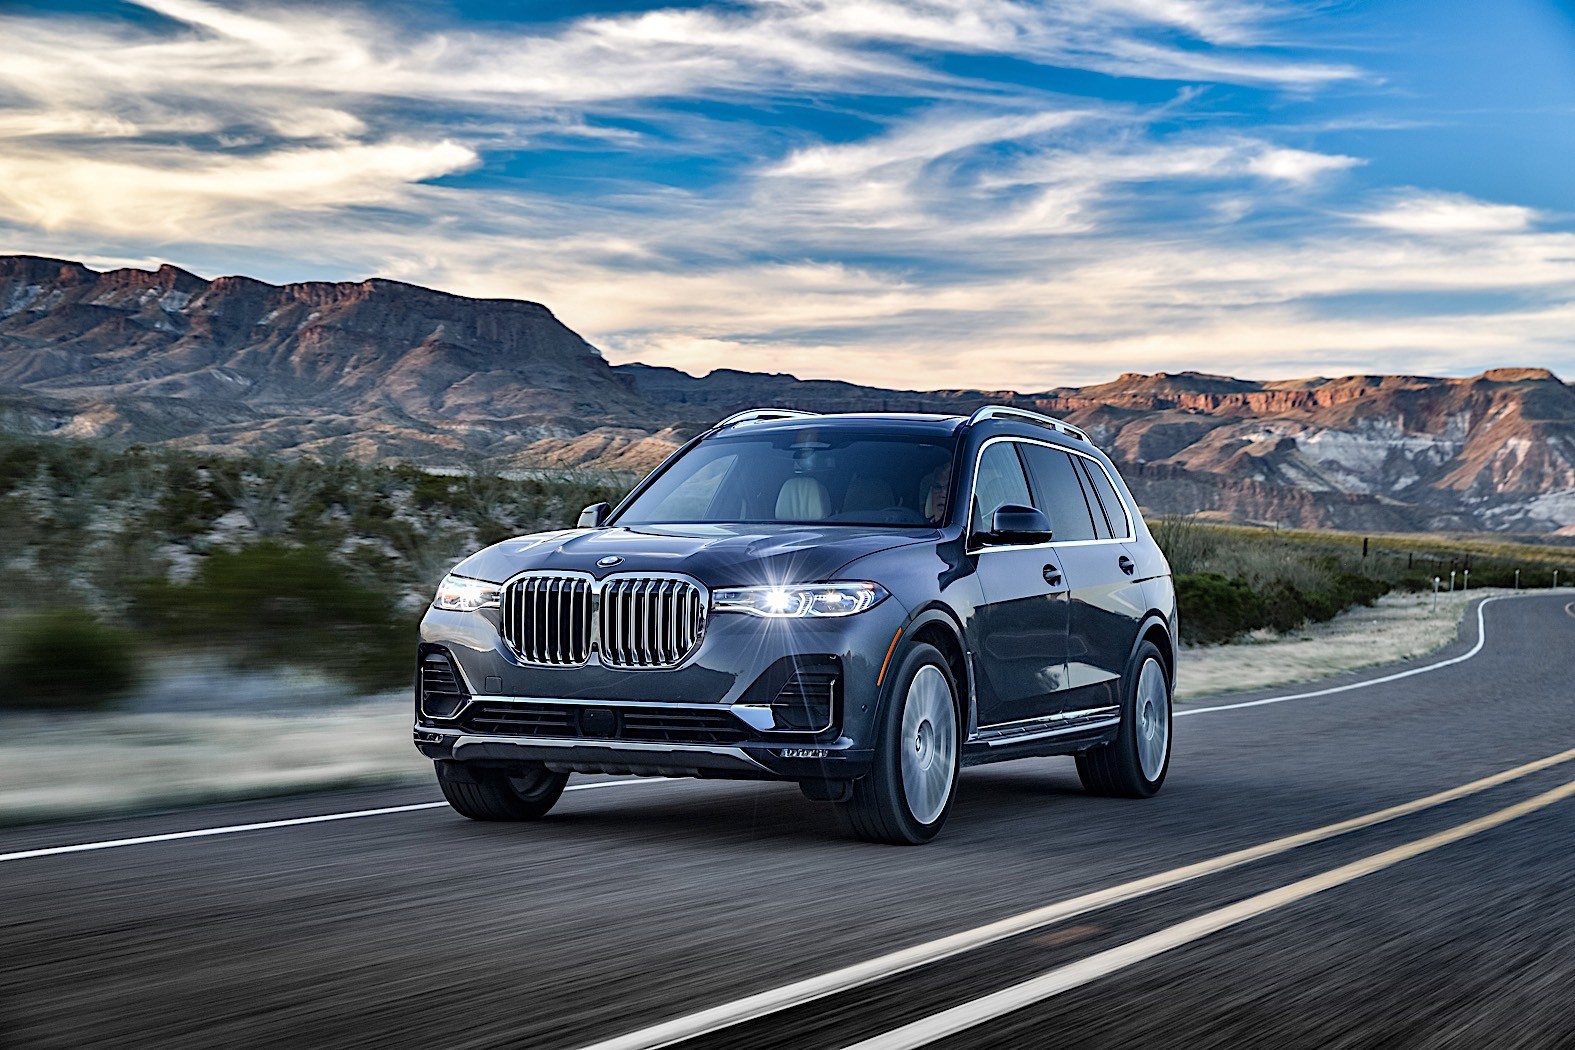 2020 BMW X7 Shows Up on the Road, Photographers Shoot Like Crazy